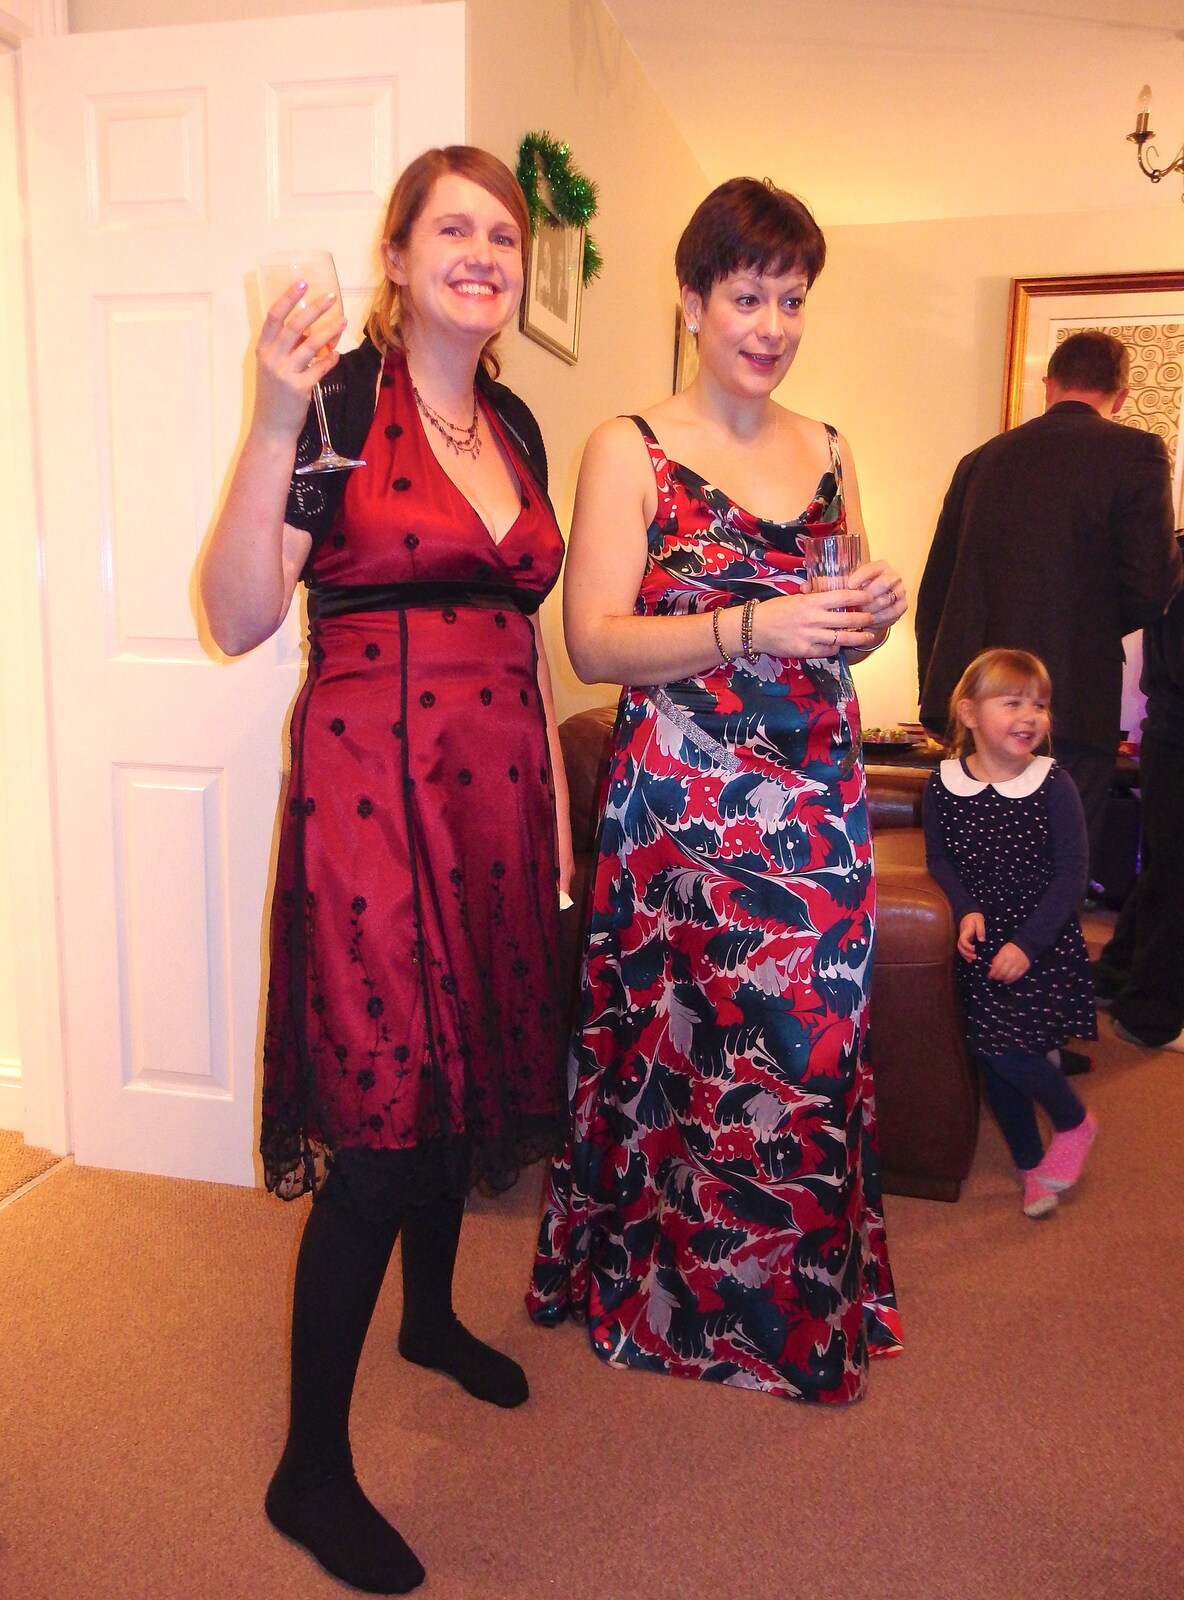 Isobel and Clare from A Christmas Party, Brome, Suffolk - 21st December 2013